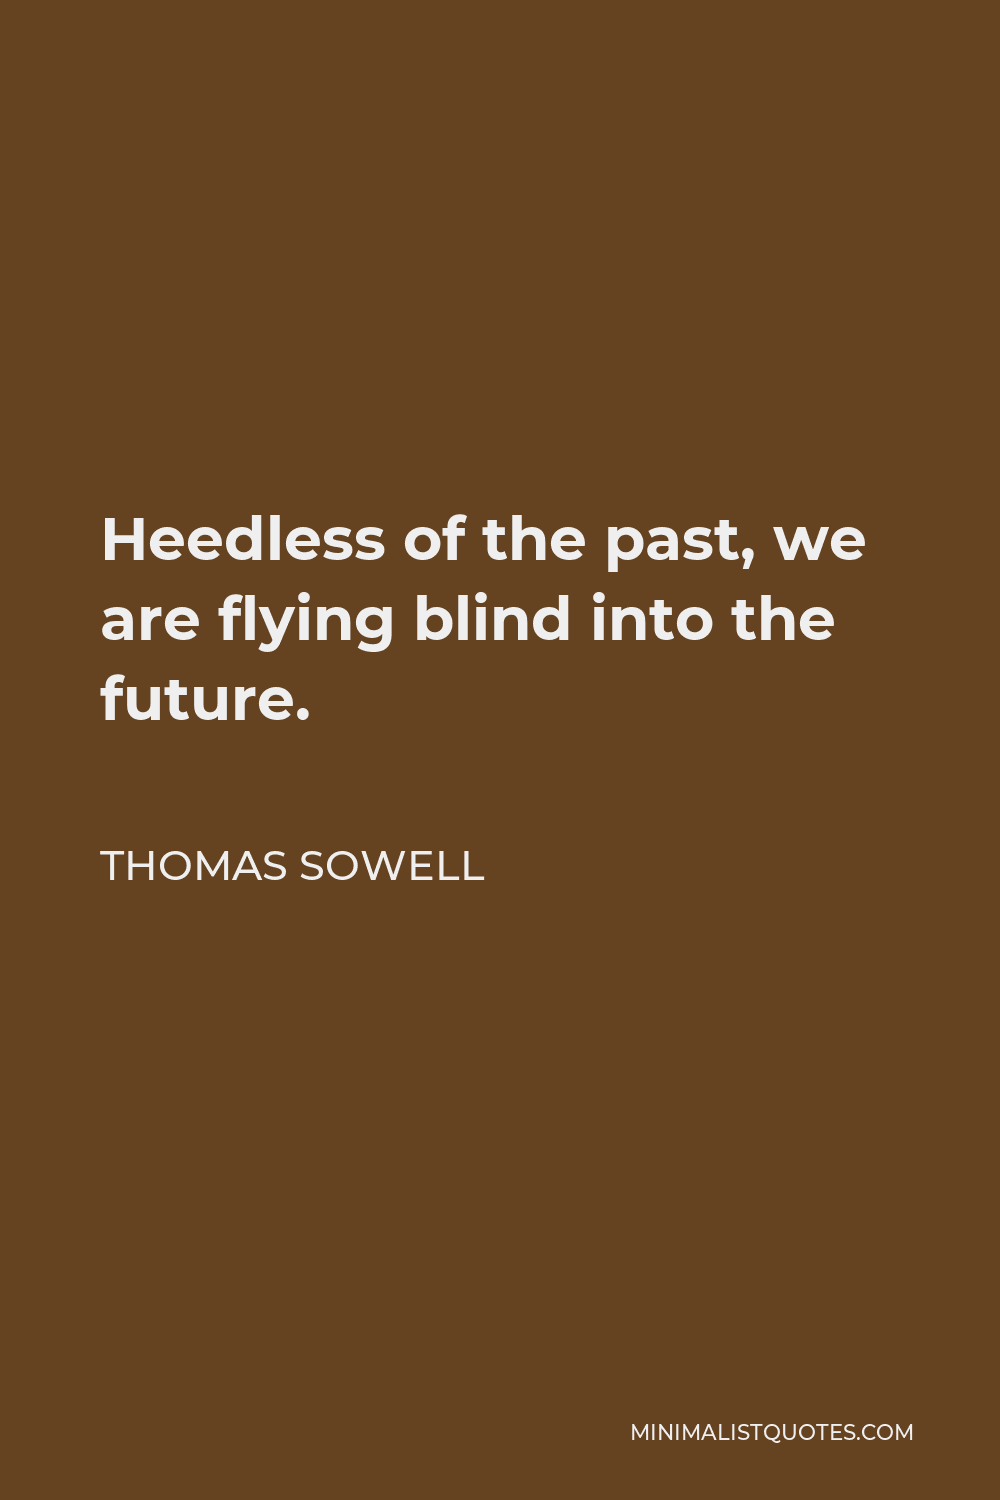 Thomas Sowell Quote - Heedless of the past, we are flying blind into the future.